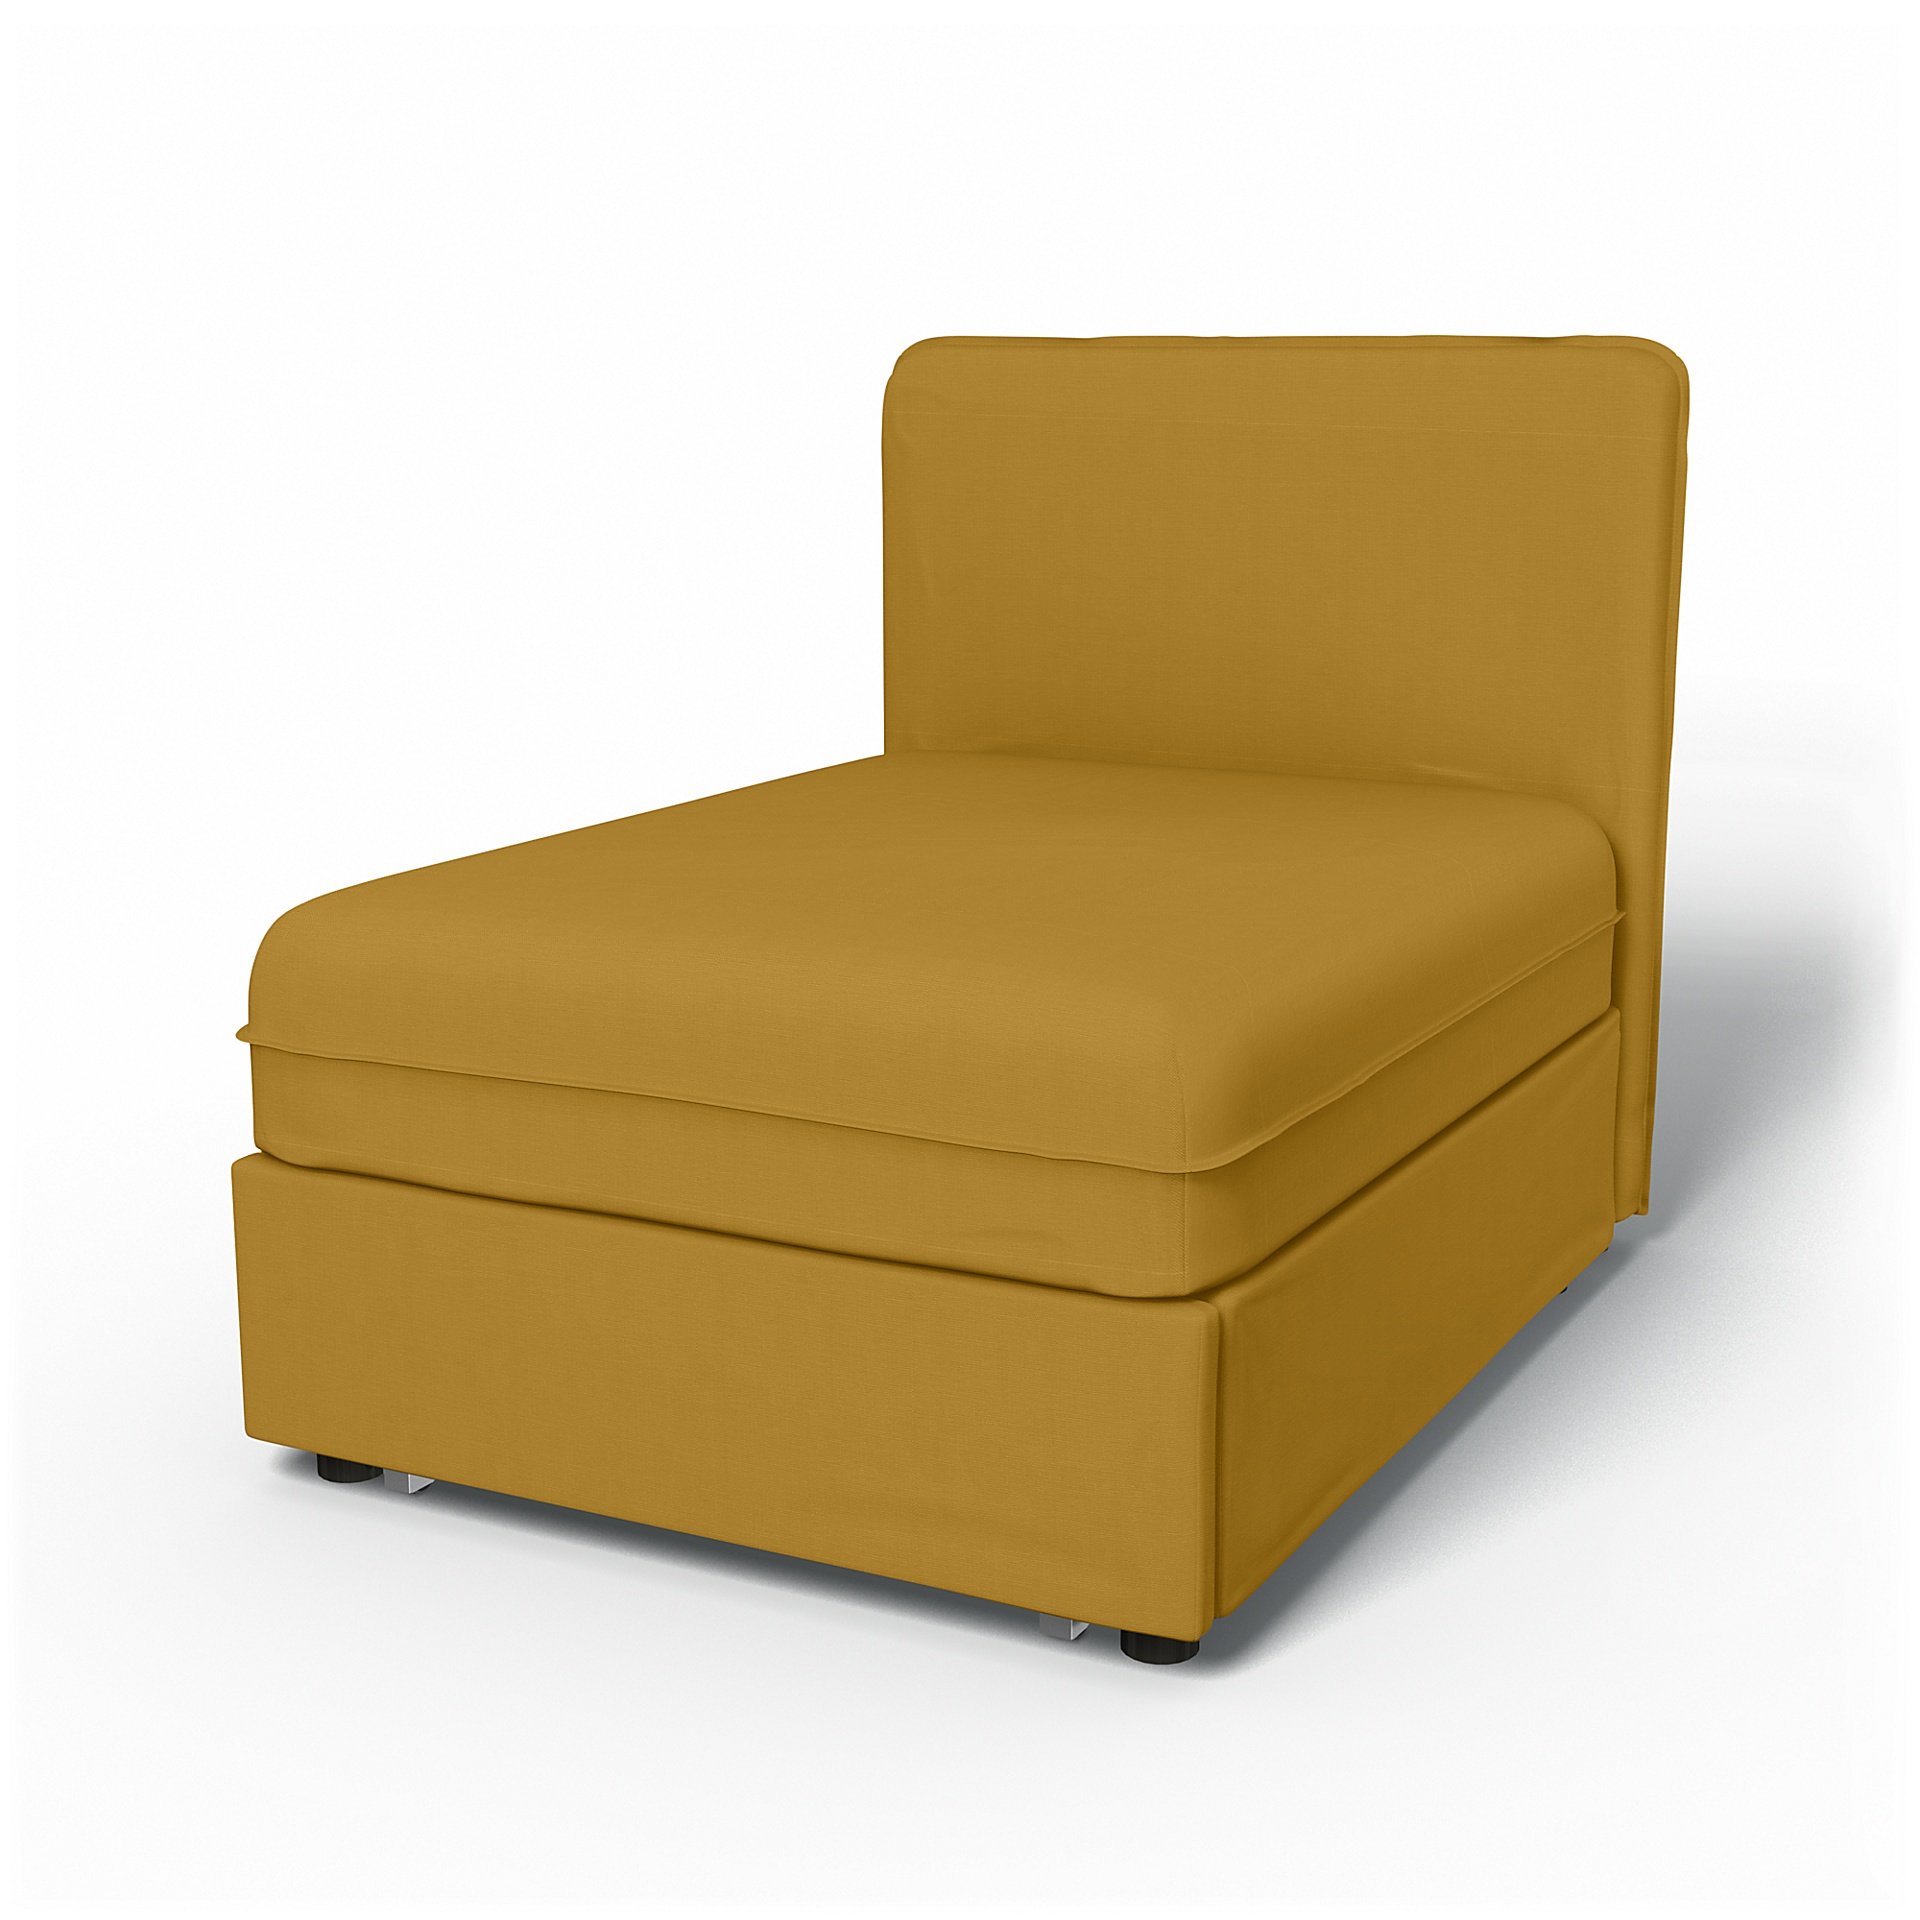 IKEA - Vallentuna Seat Module with Low Back Sofa Bed Cover 80x100 cm 32x39in, Honey Mustard, Cotton 